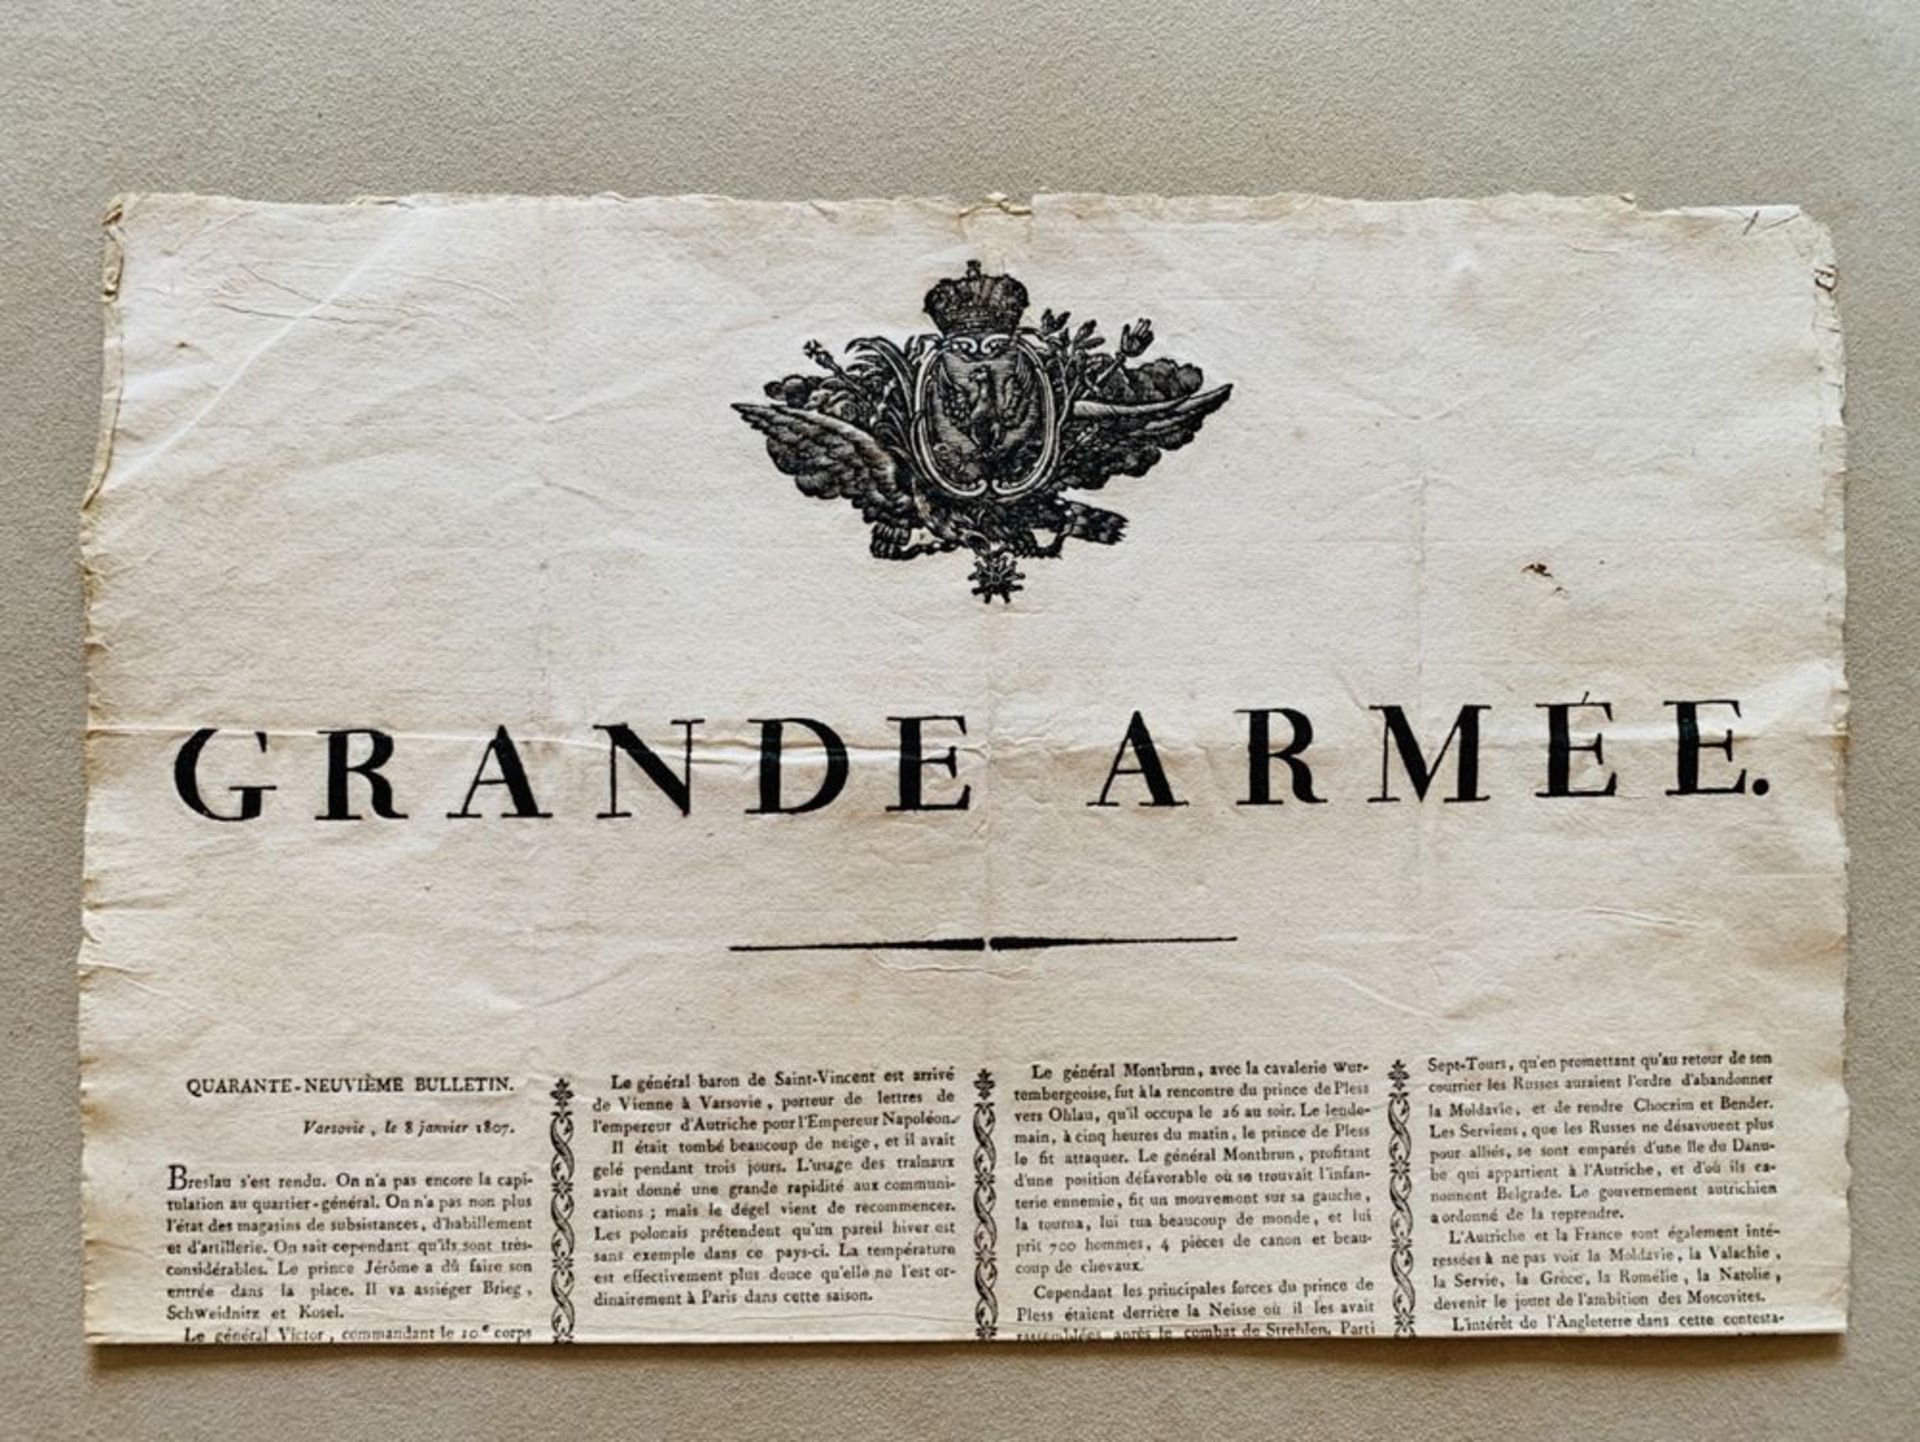 BULLETIN DE LA GRANDE ARMÉE - The 49th and 50th bulletins of the Great Army of [...]